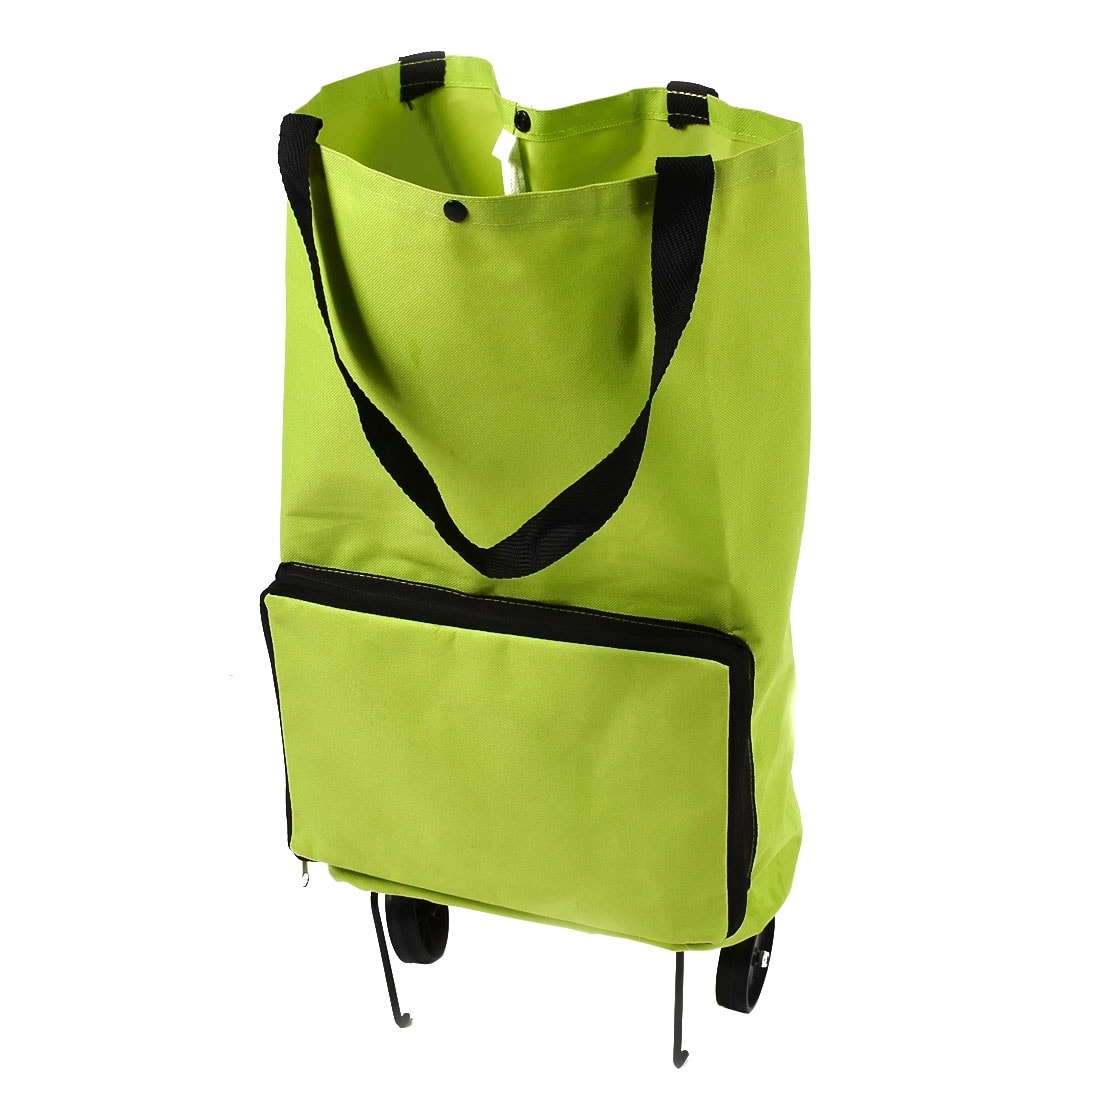 What are trolley bags? - LOTUS TROLLEY BAG